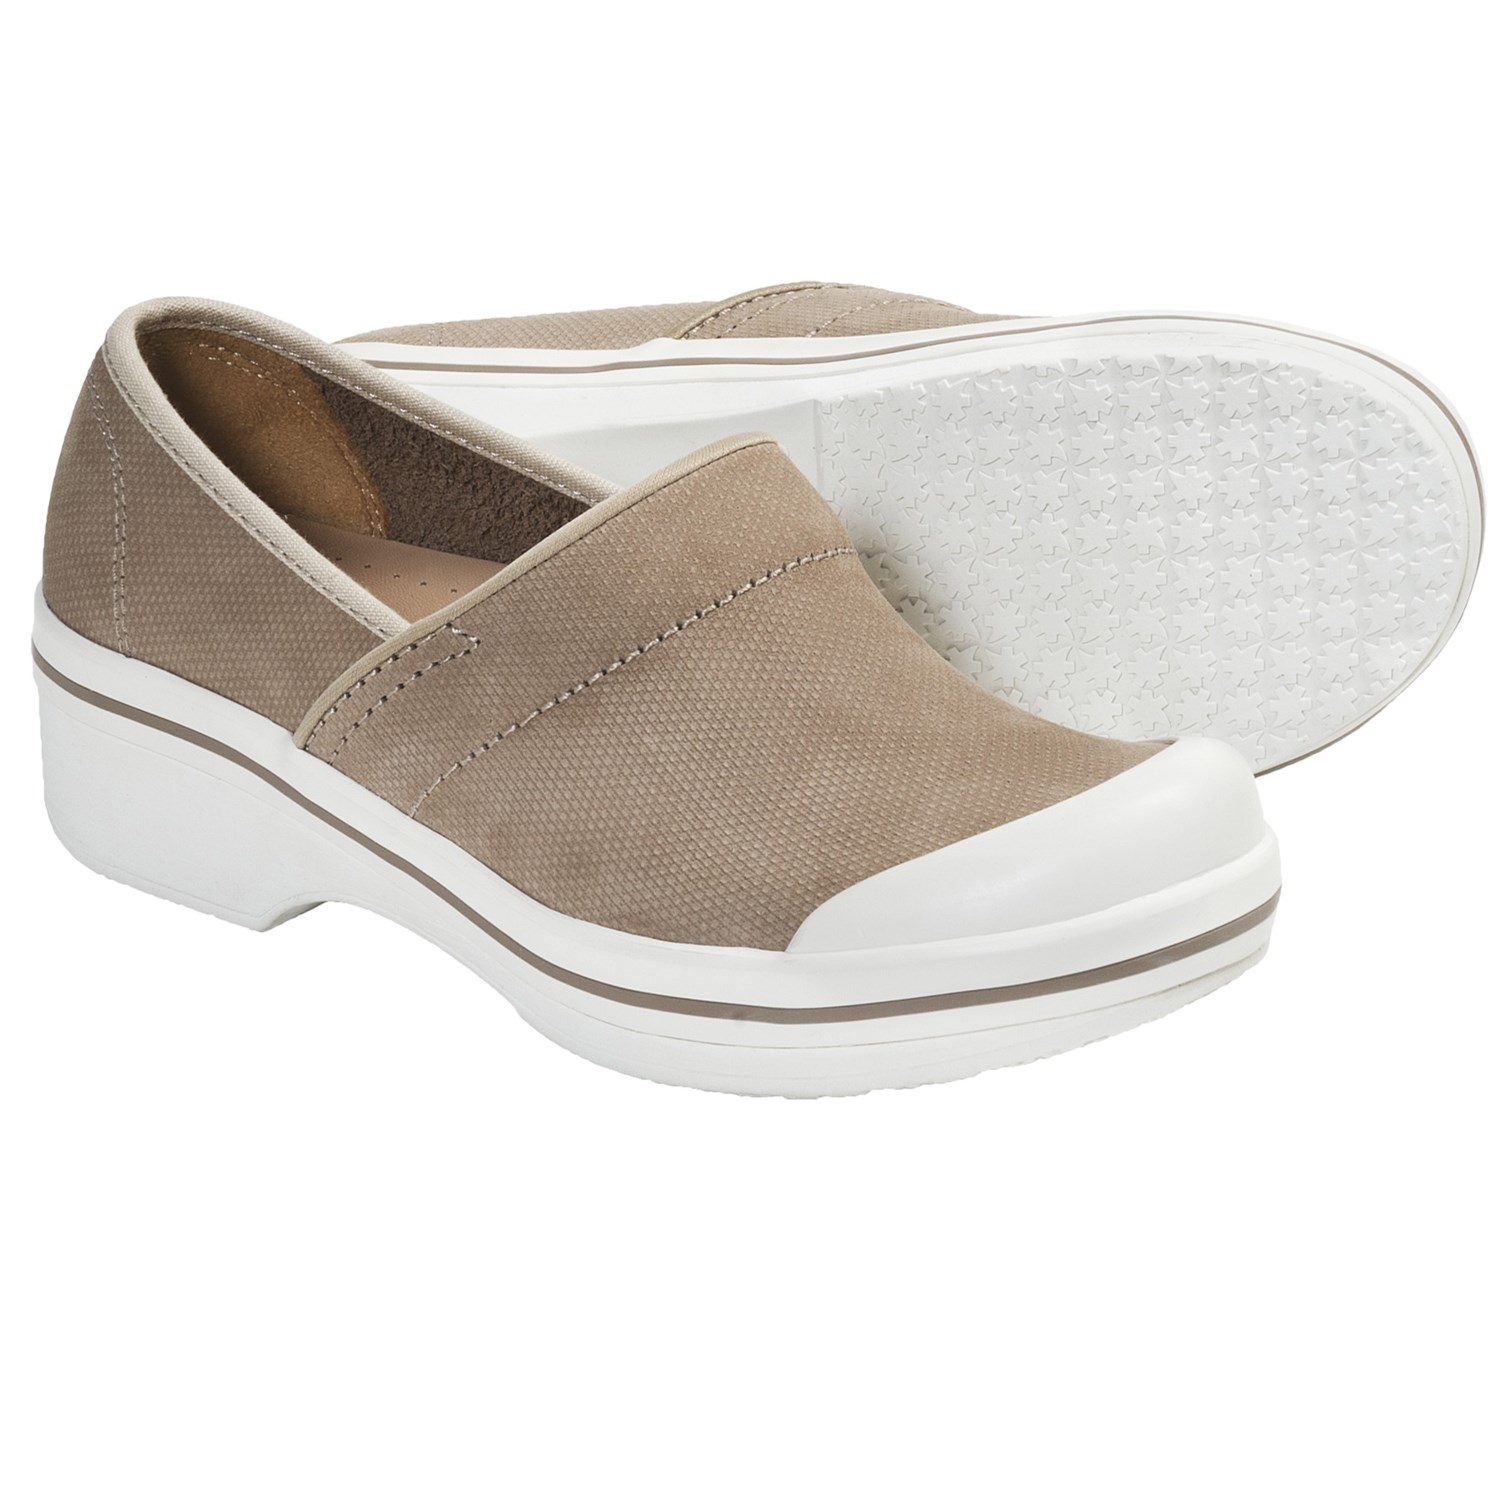 Download this Dansko Volley Shoes For Women Sandpiper Hopsack picture